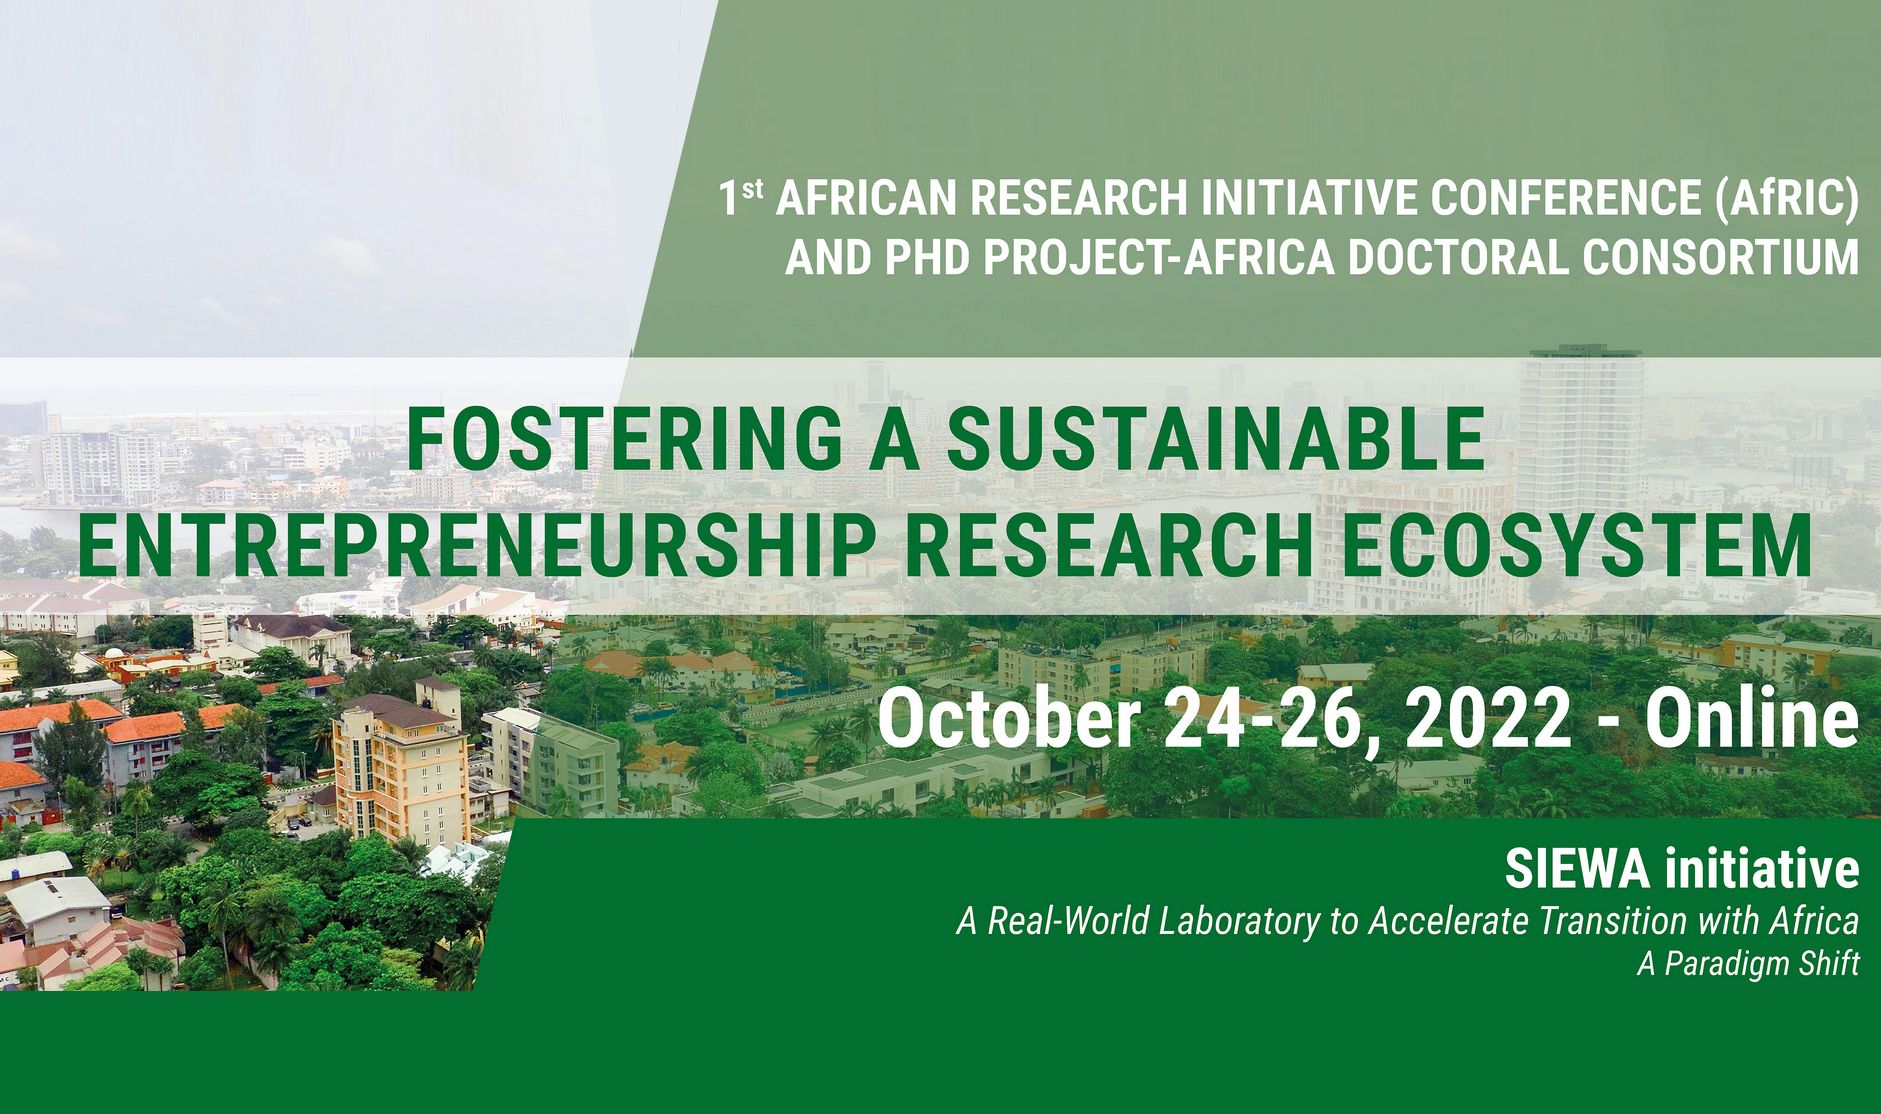 1st African Research Initiative Conference